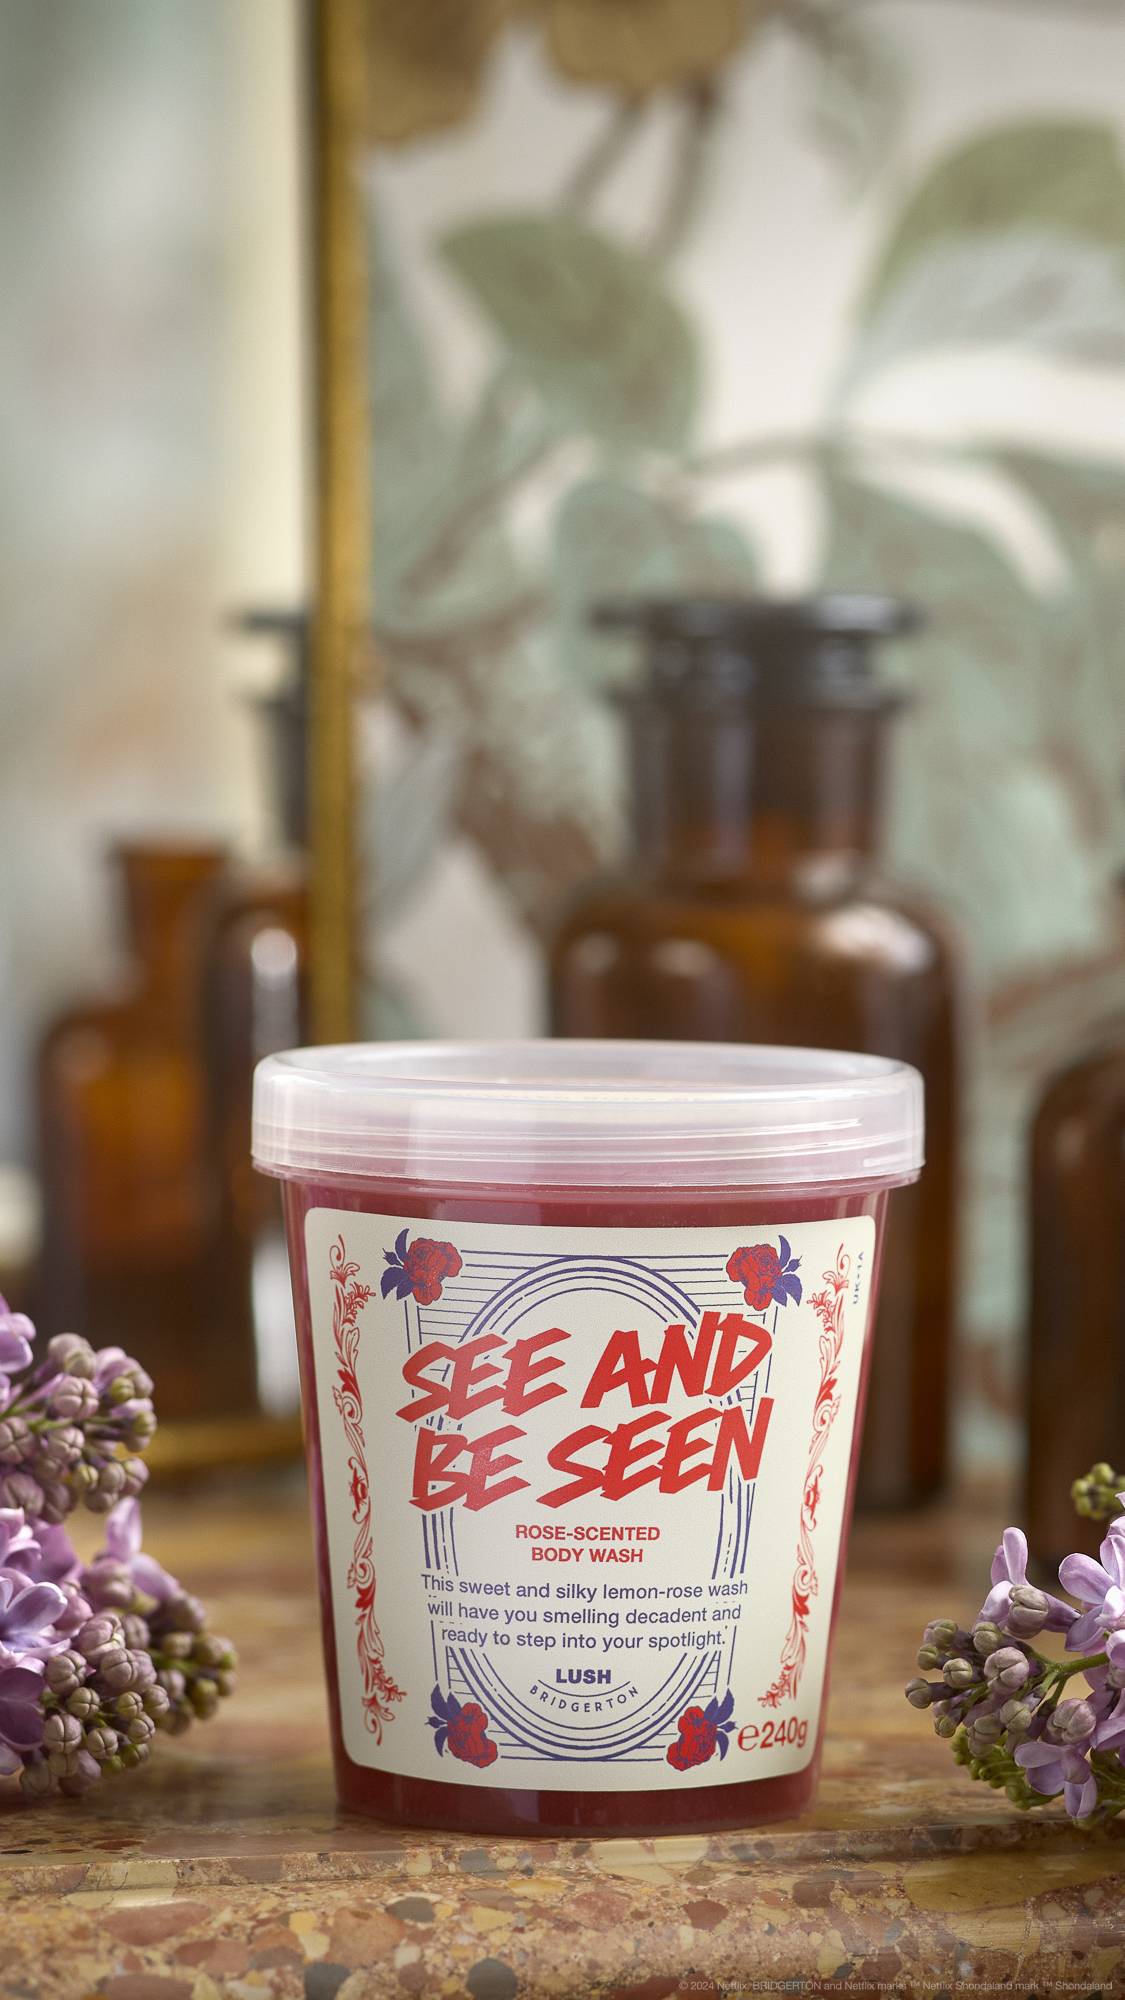 An out-of-focus background of leaves and what appears to be a dressing table. The focus is the clear LUSH pot of See And Be Seen body wash placed on a marbled counter with flowers on either side.